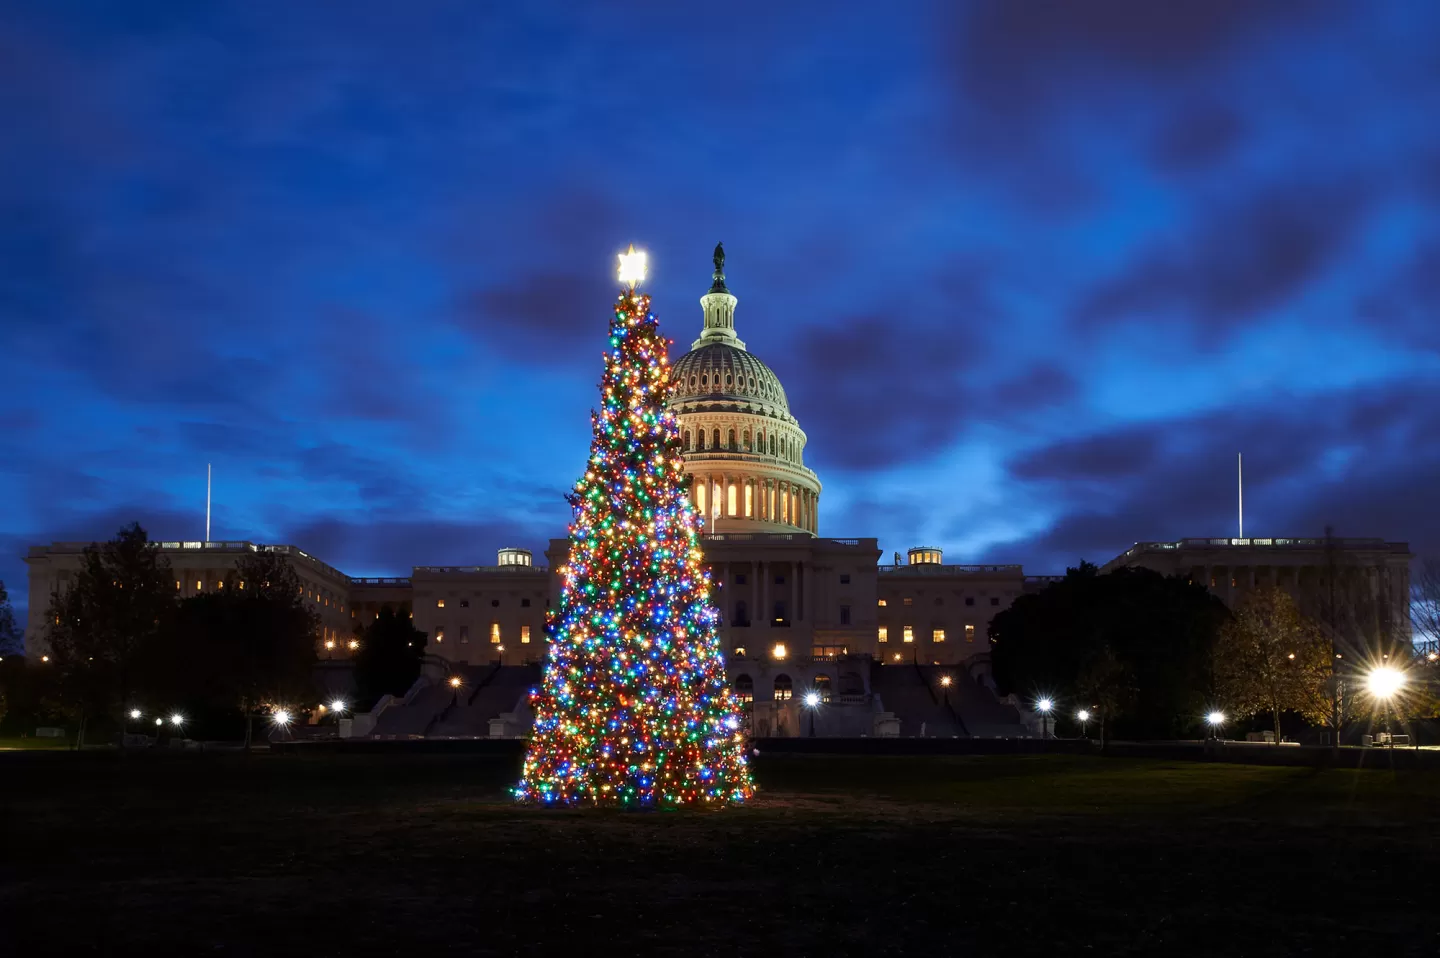 The 2019 U.S. Capitol Christmas Tree with lights on.